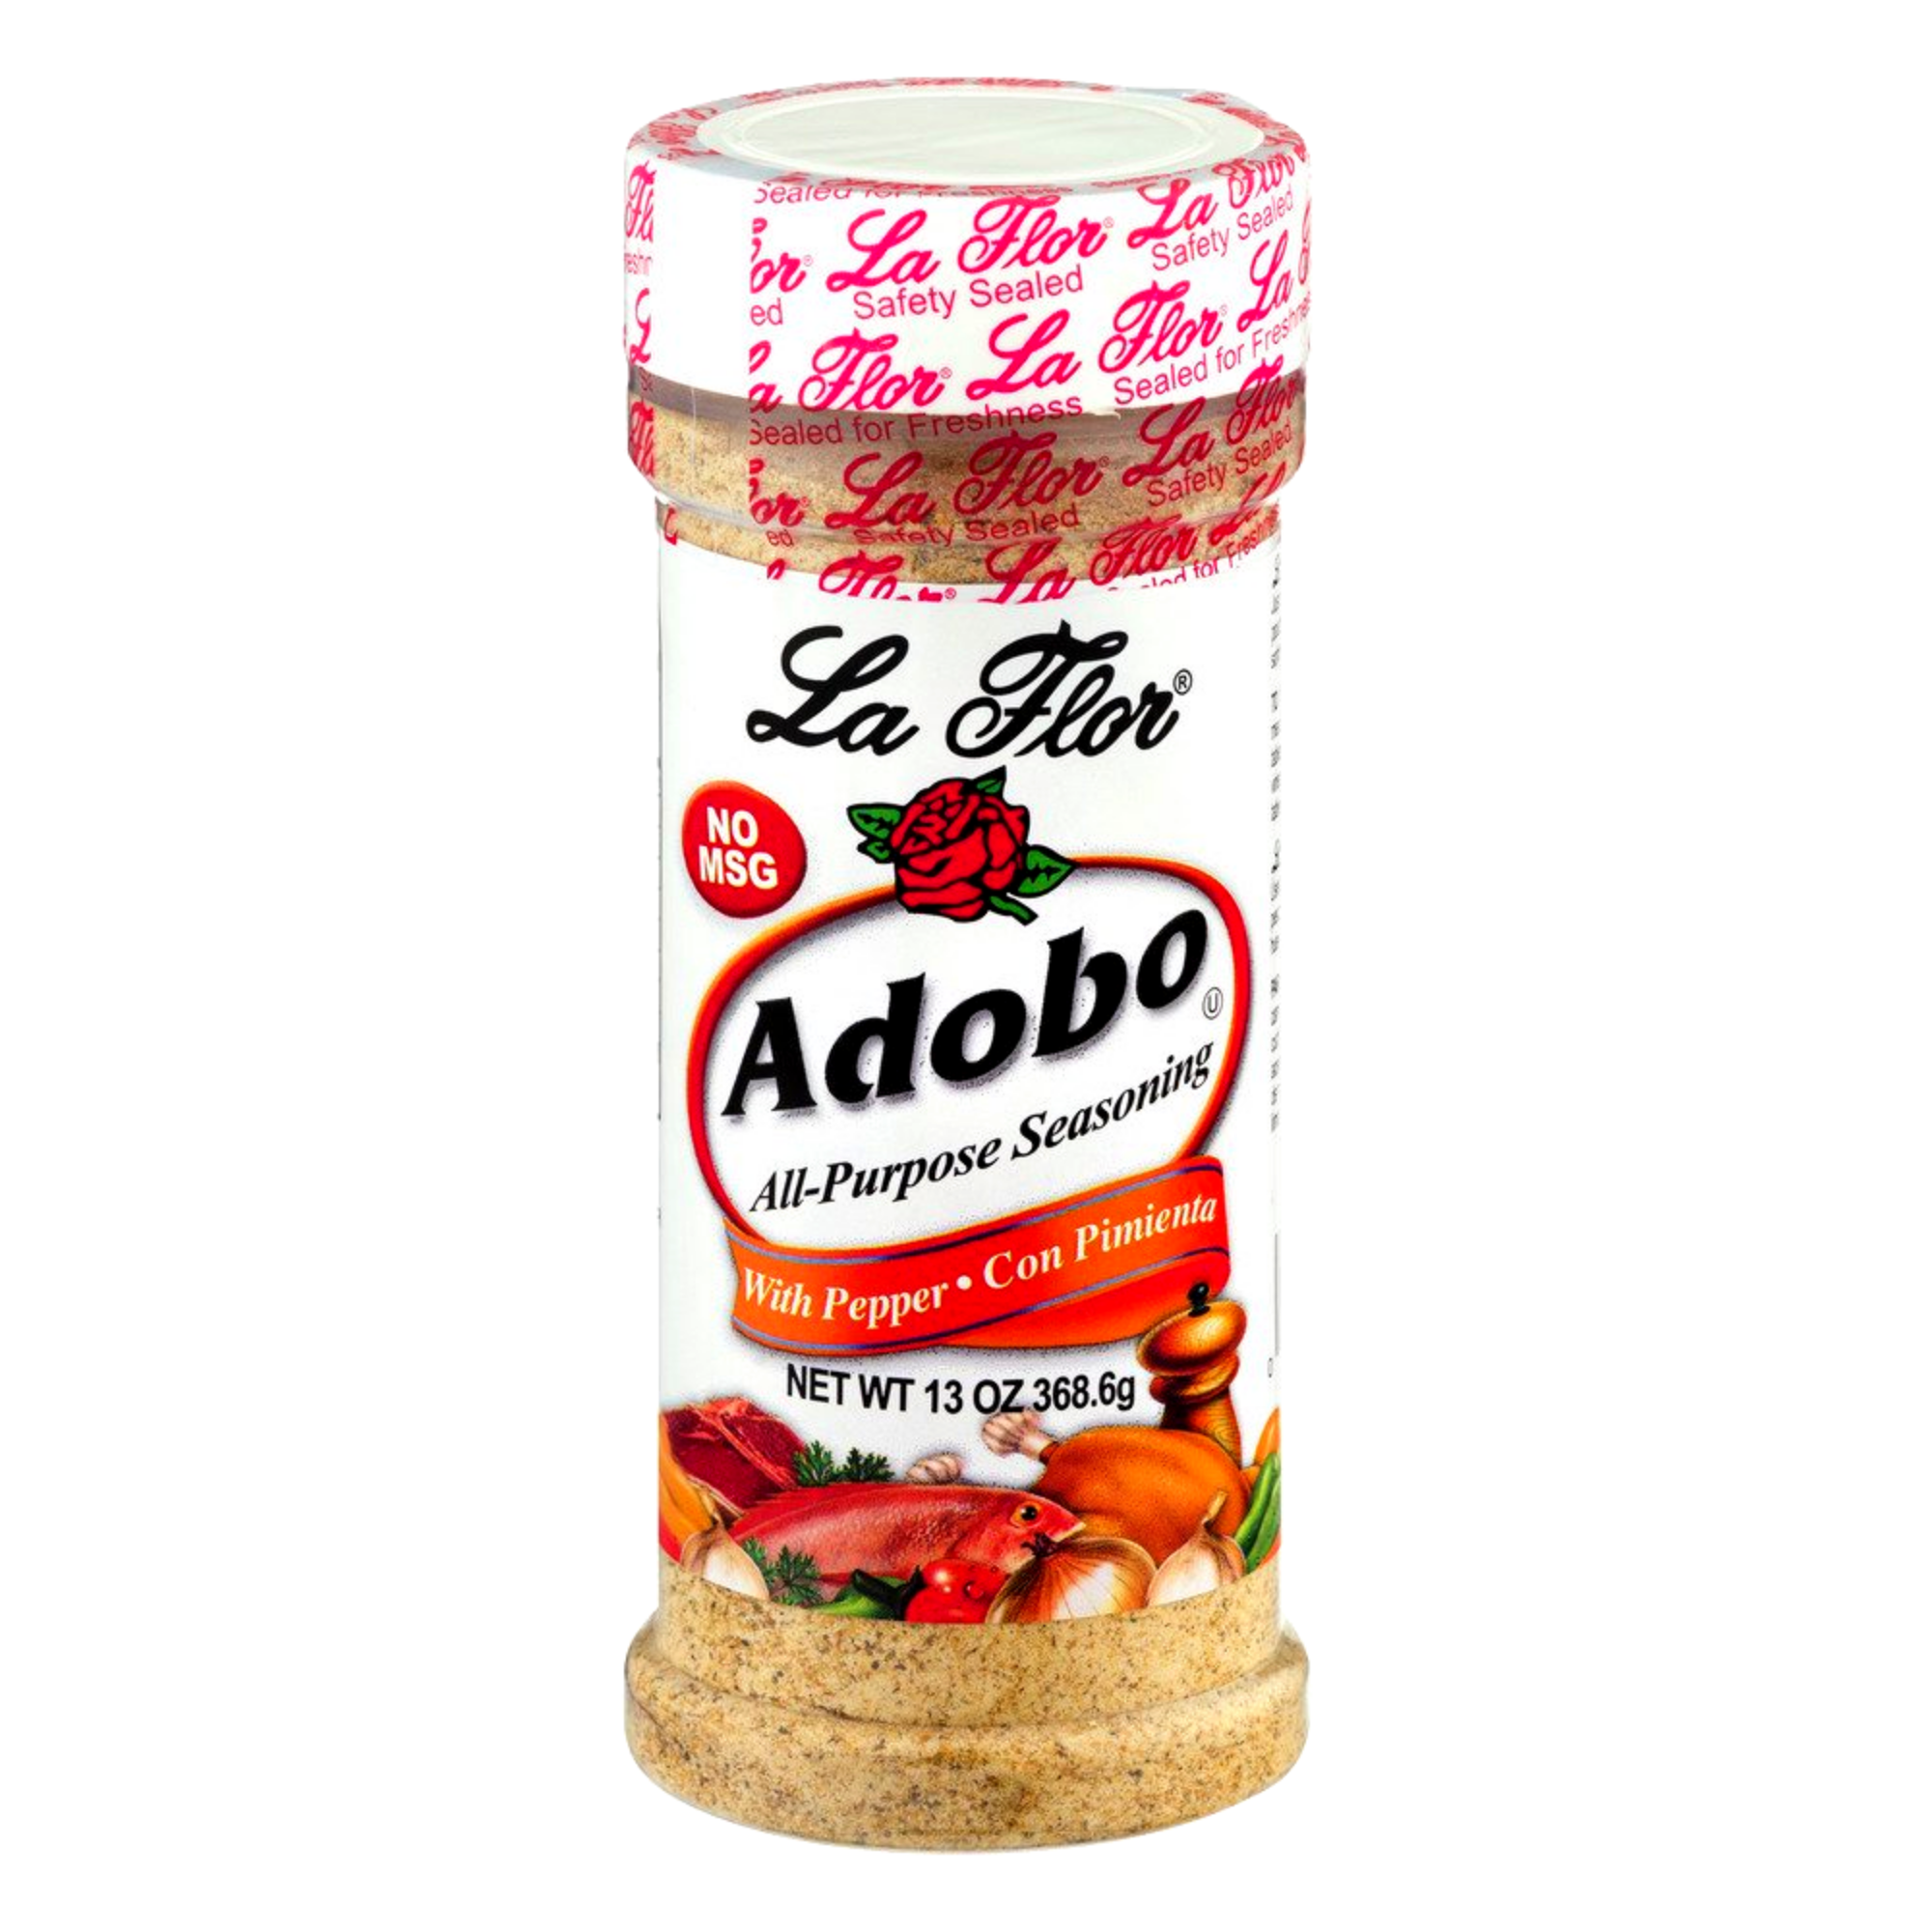 Made with Love, Butter, and Adobo Seasoning – A Little Bit of This N' That